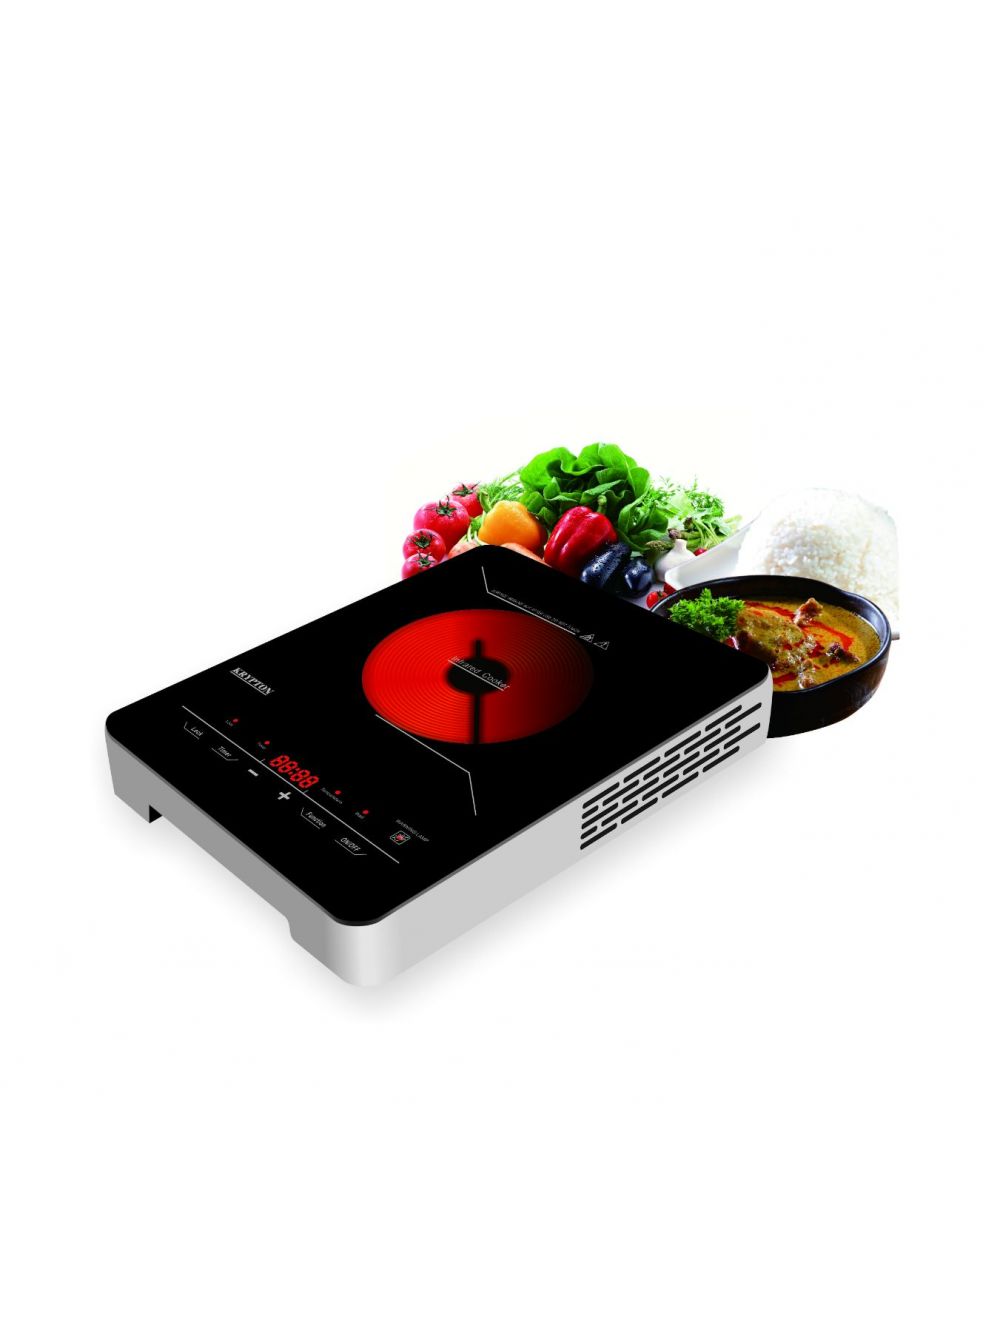 Krypton 2000W Infrared Cooker | Electric Infrared Glass Ceramic Cooker -KNIC6150